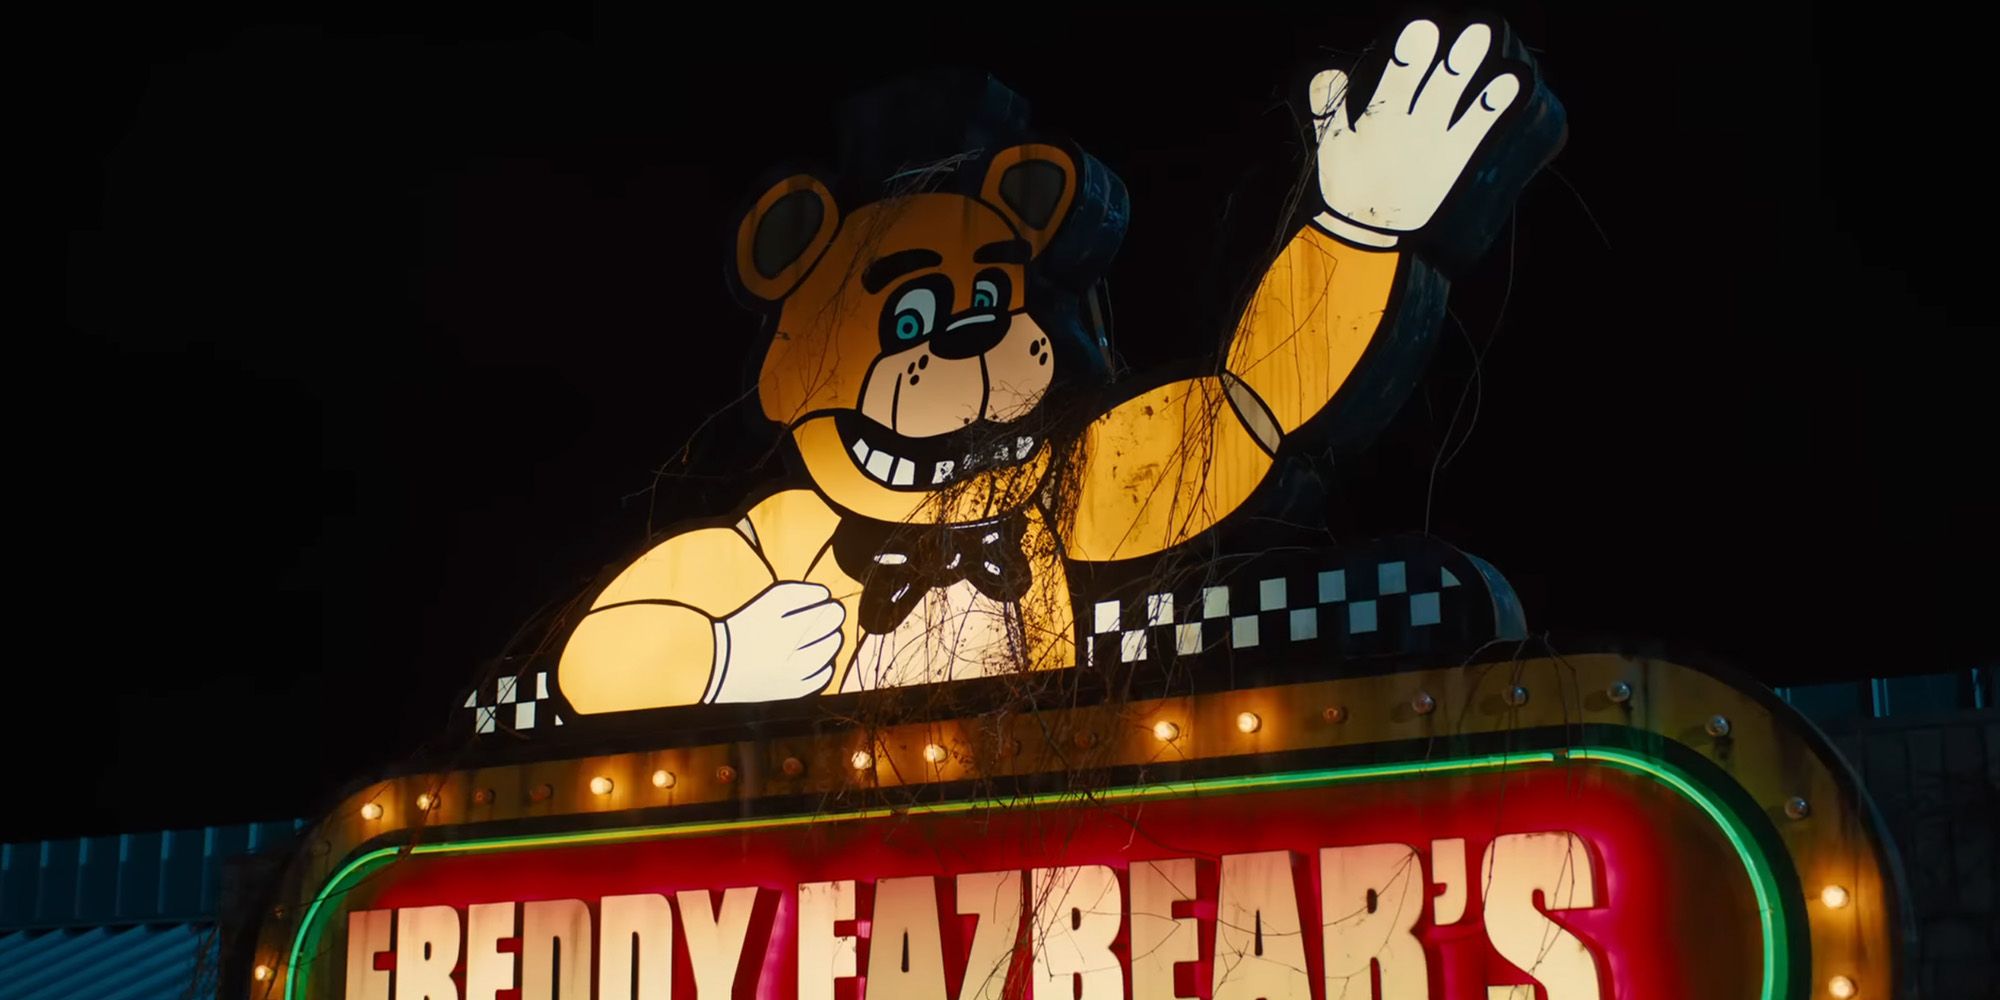 The neon Freddy Fazbear's Pizzeria sign from the Five Nights At Freddy's movie teaser trailer.